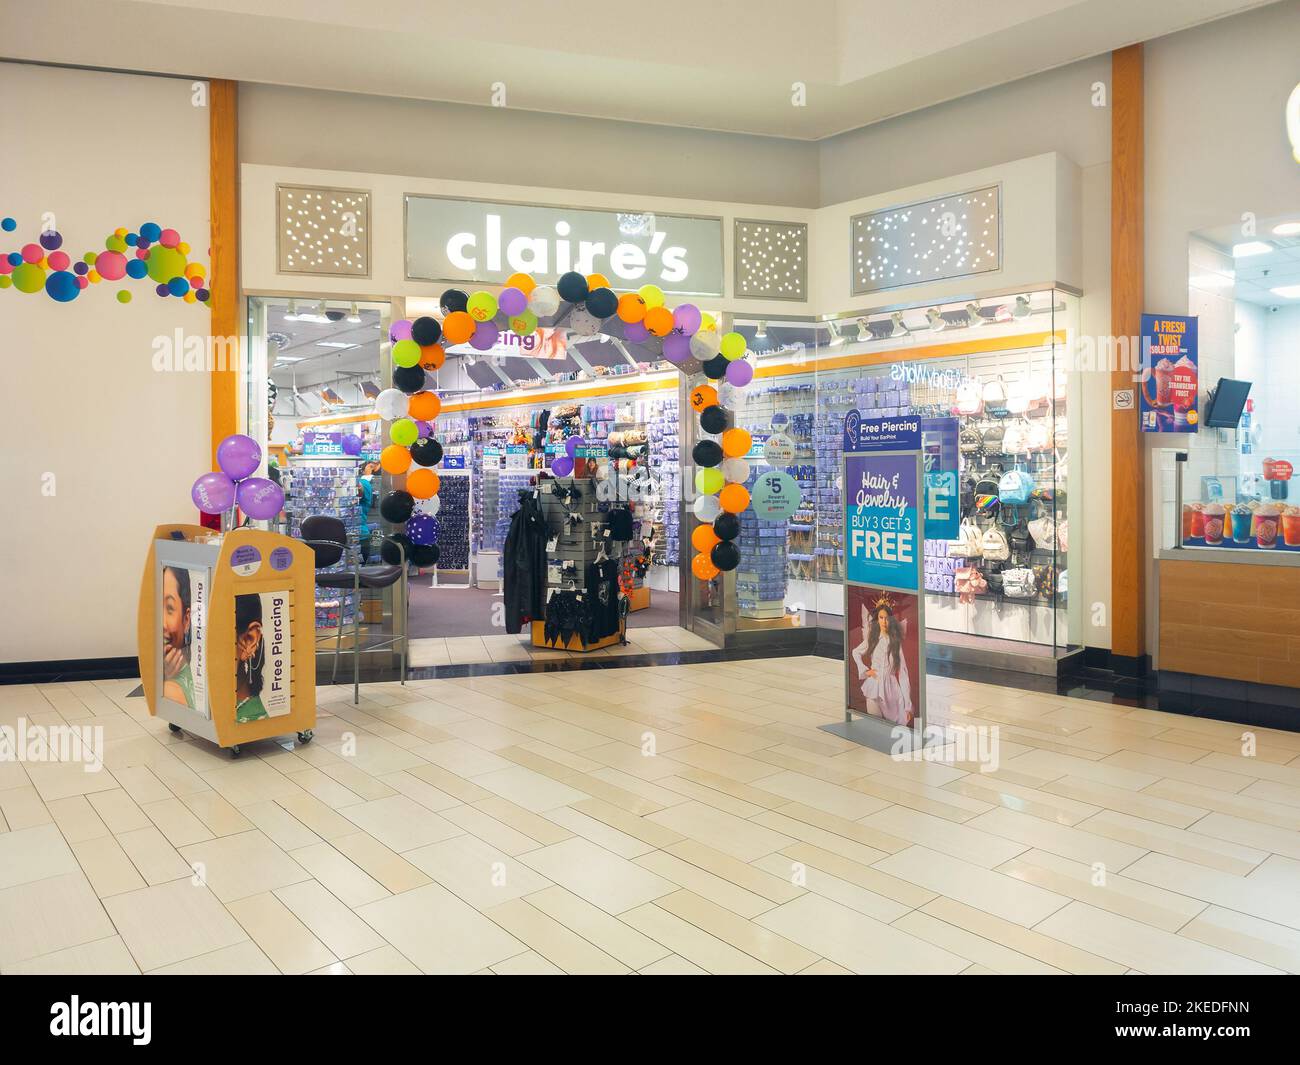 New Hartford, New York - Oct 24, 2022: Landscape Closeup View of Claire's Accessories Storefront. Claire's is a US Retailer of Accessories, Jewelry, a Stock Photo